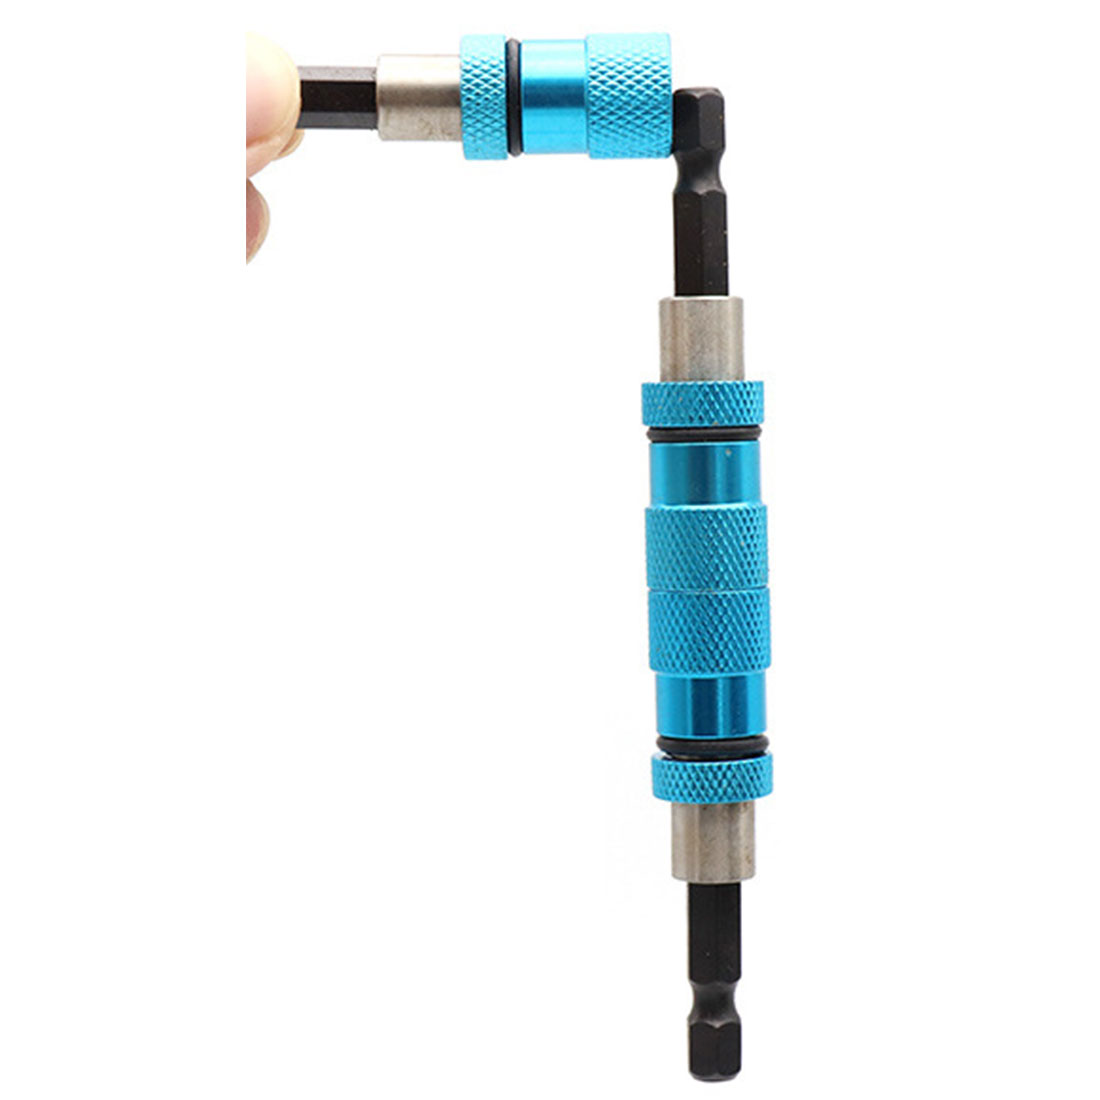 Quick Release Magnetic Bit Screwdriver Holder 1/4" Hex Shank Magnetic Drywall Screw Bit Holder Drill Screw Tool 60mm